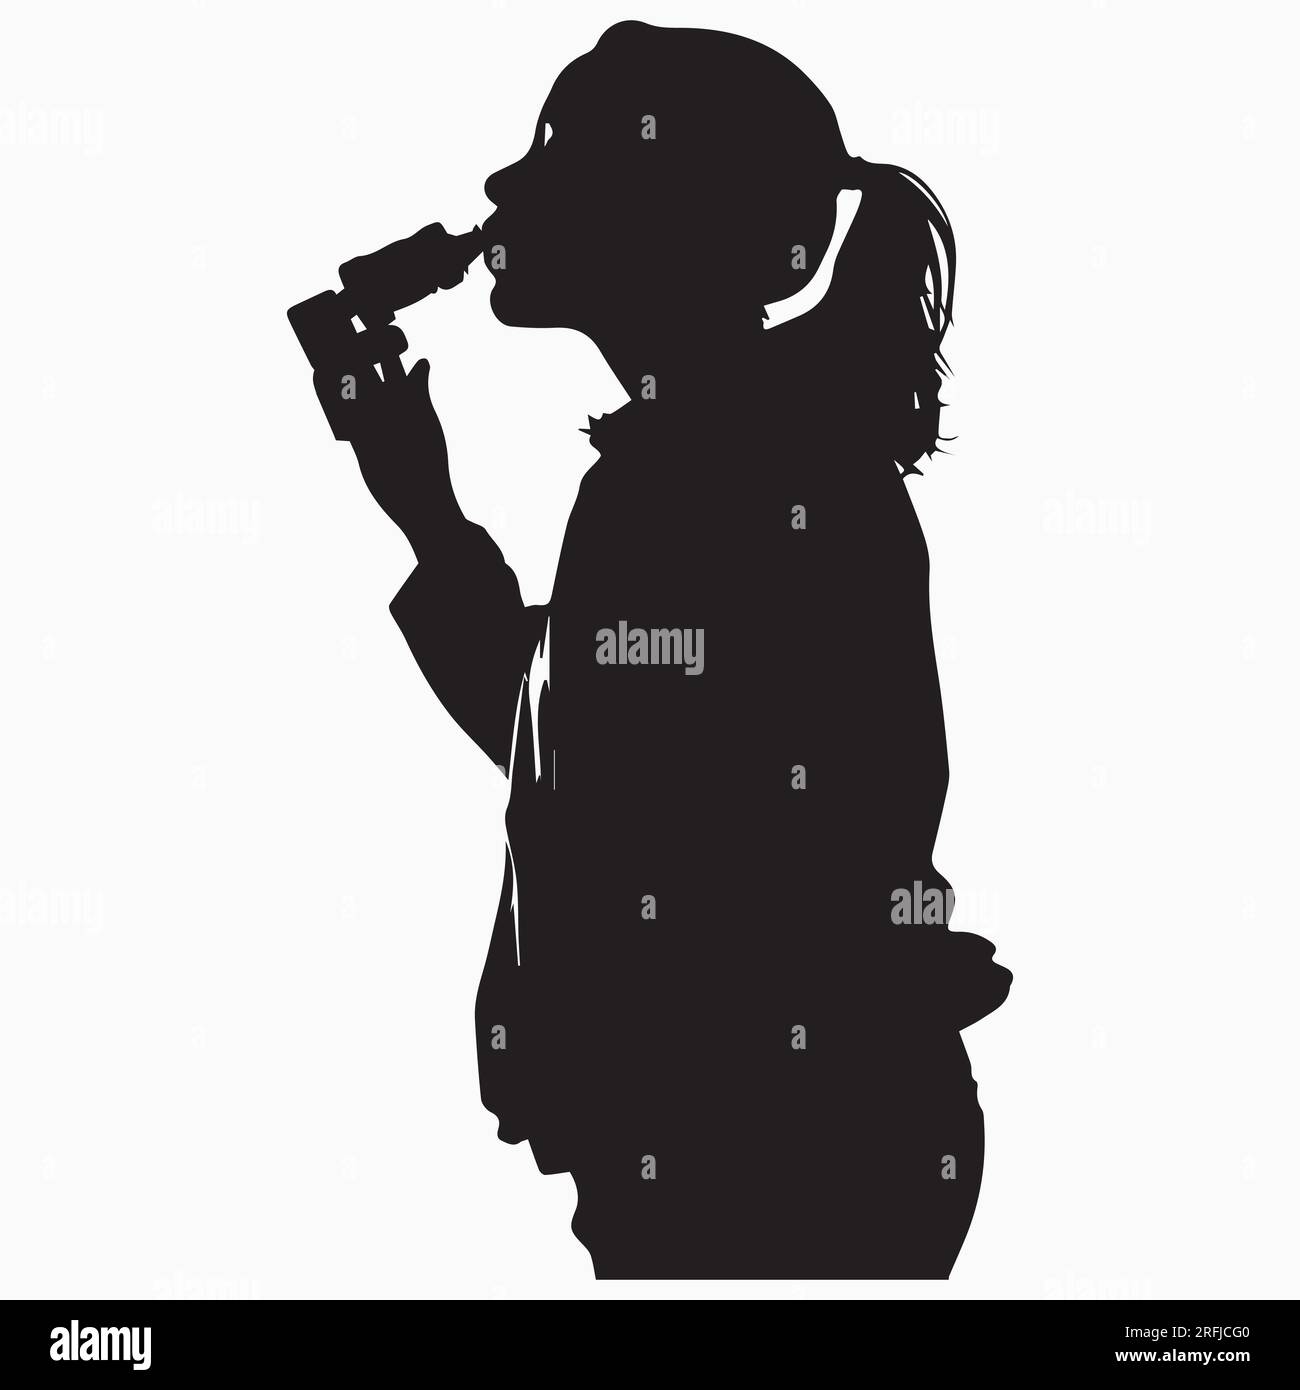 Asthma affected Girl silhouette vector illustration Stock Vector